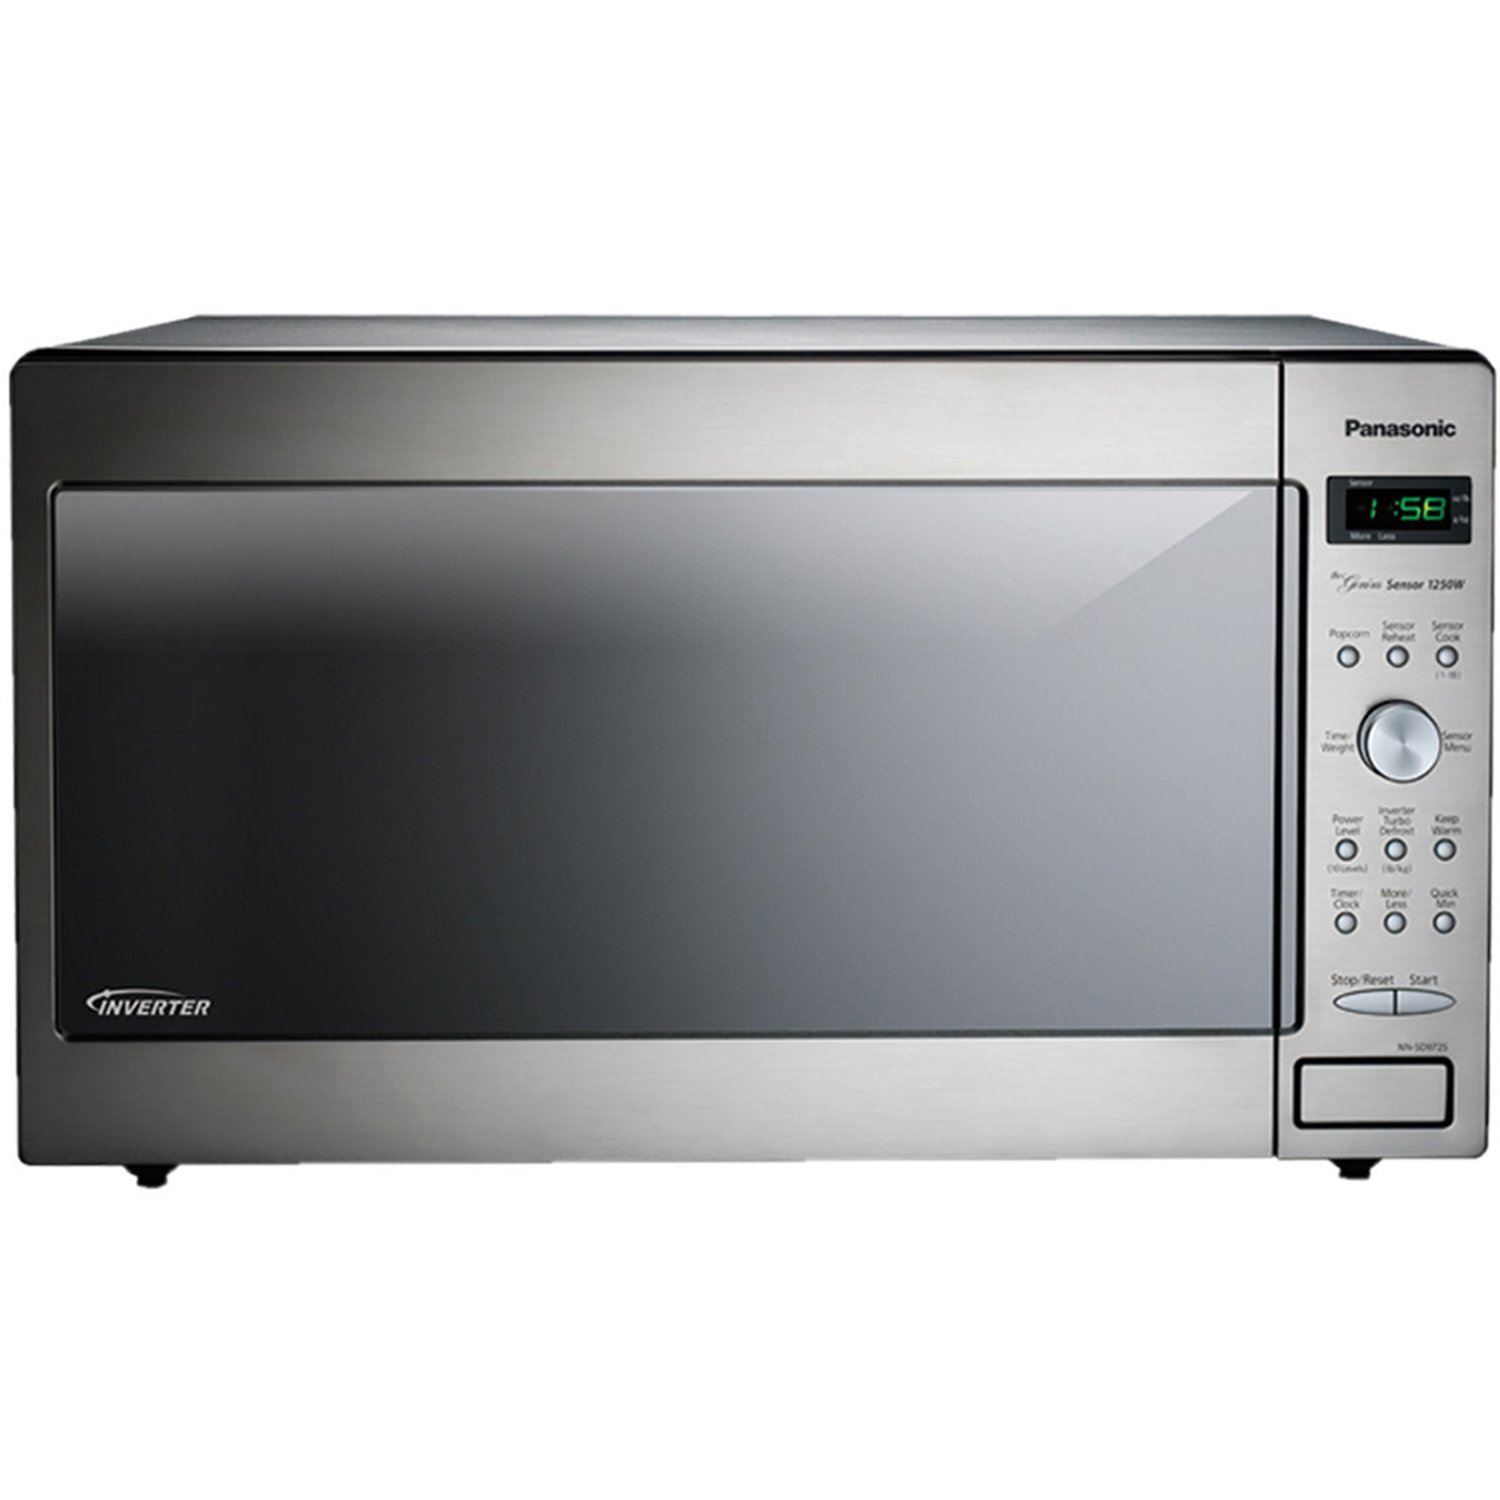 Panasonic NN-SD972S Stainless 1250W 2.2 Cu. Ft. Countertop/Built-in Microwave with Inverter Technology